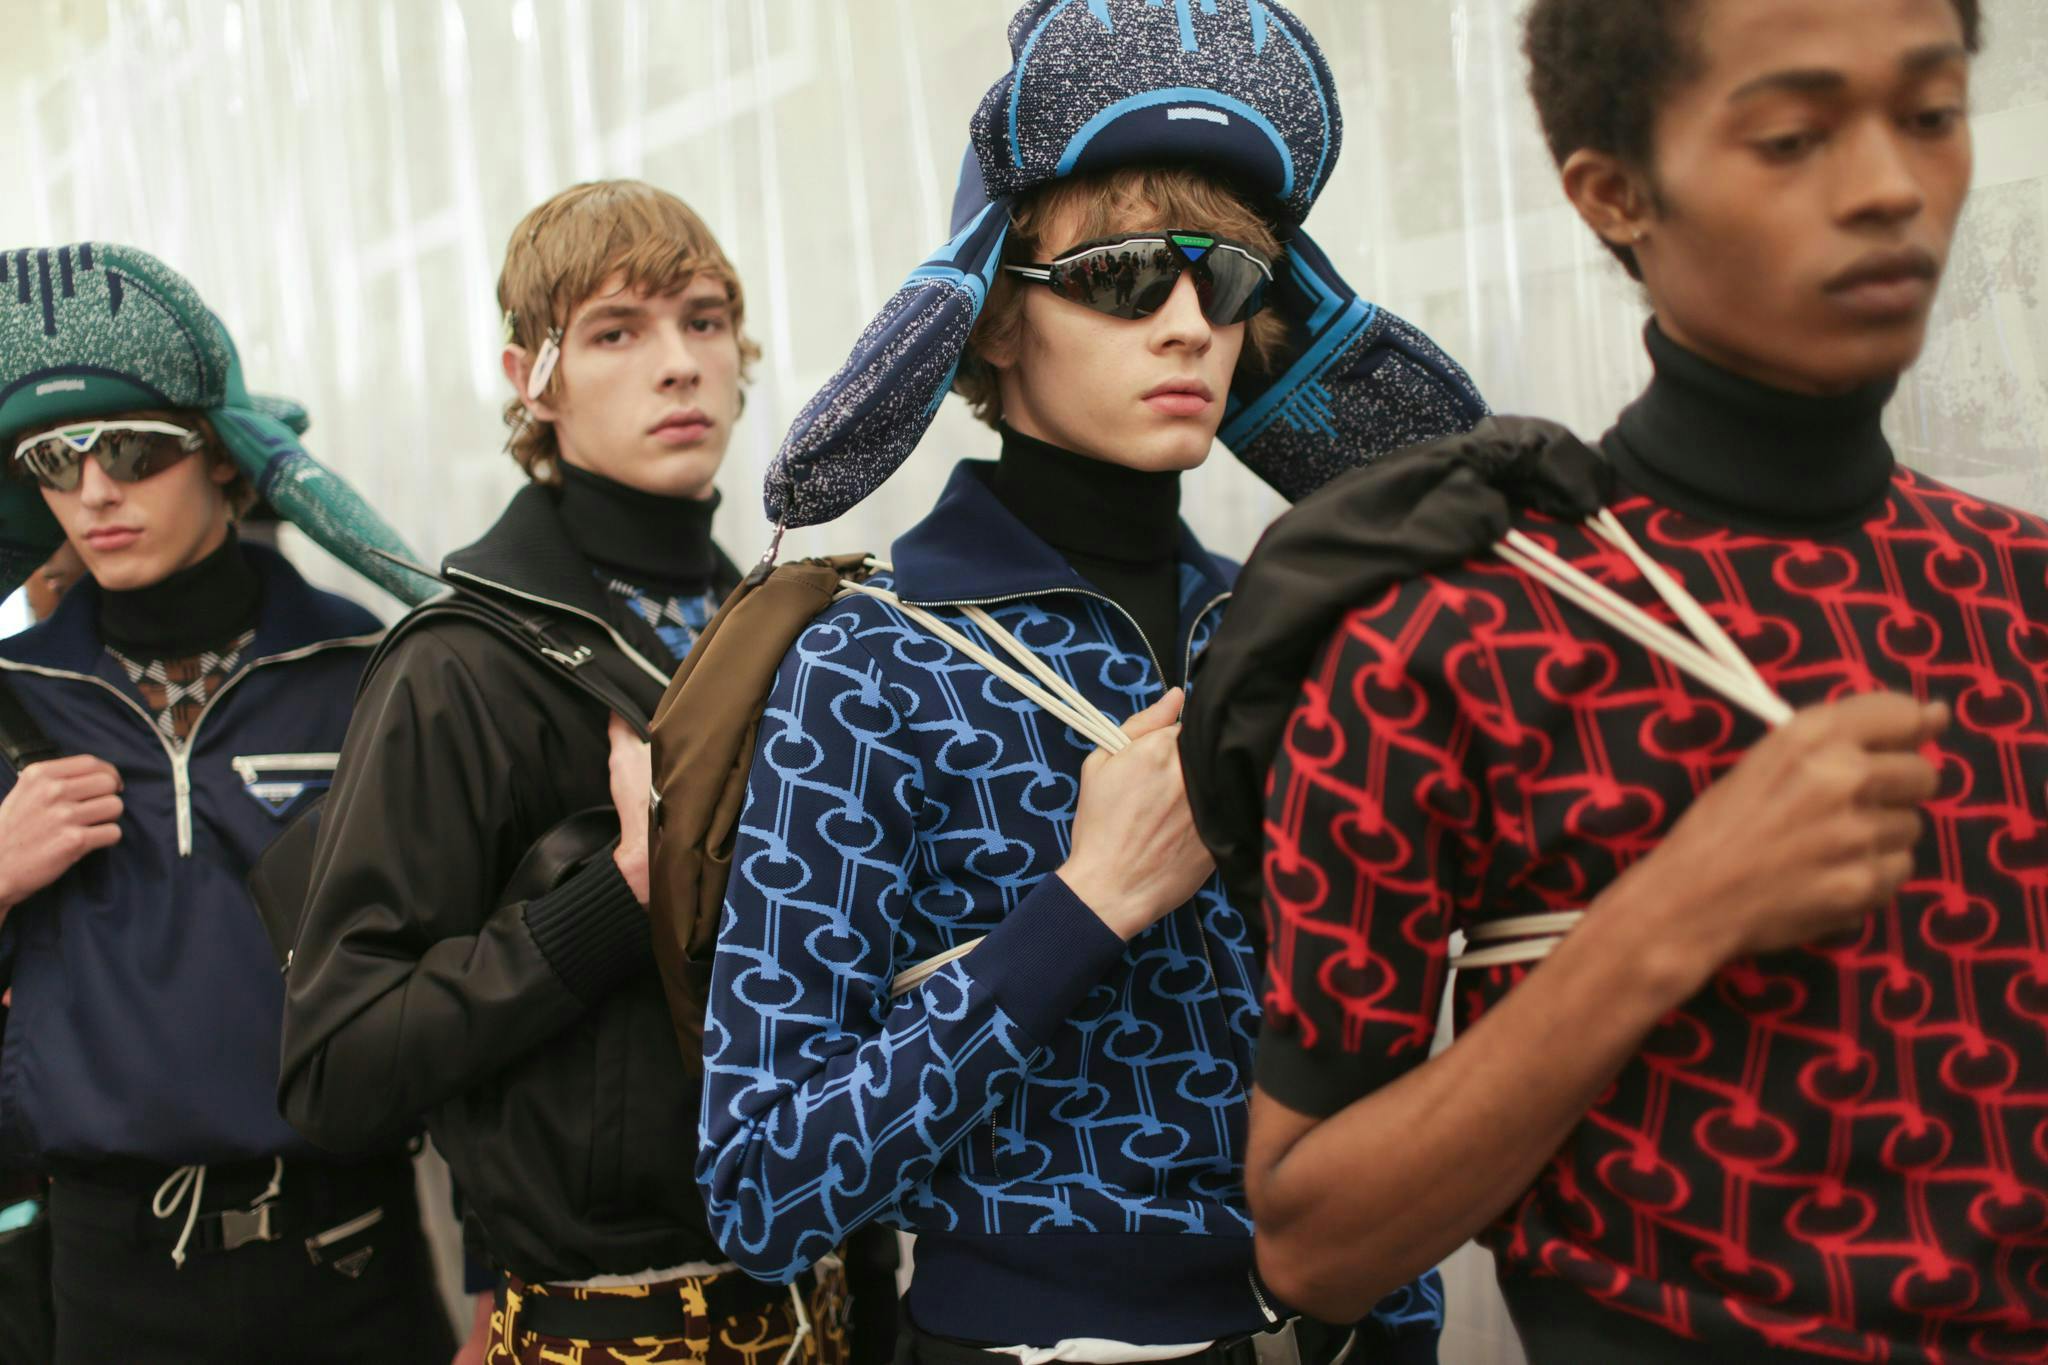 backstage at prada men's spring 2019 sunglasses accessories accessory clothing apparel person human